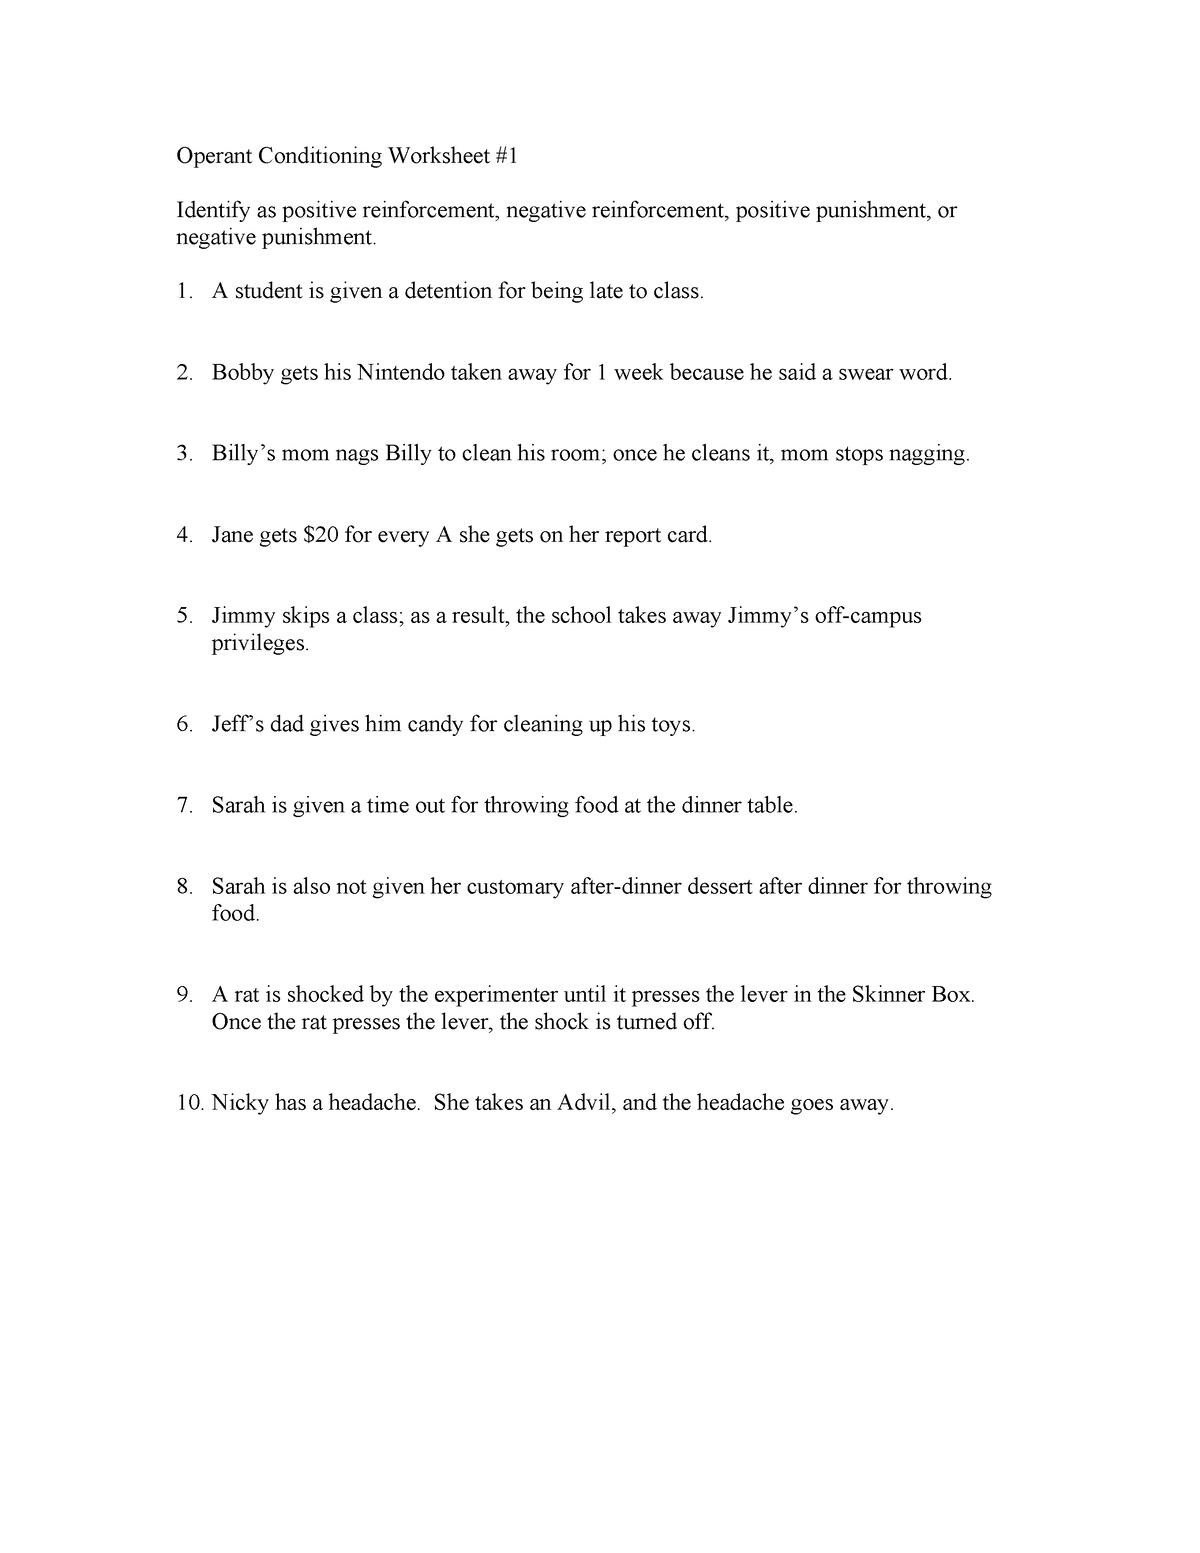 Operant Conditioning Worksheet 1 2 A student is given a detention for